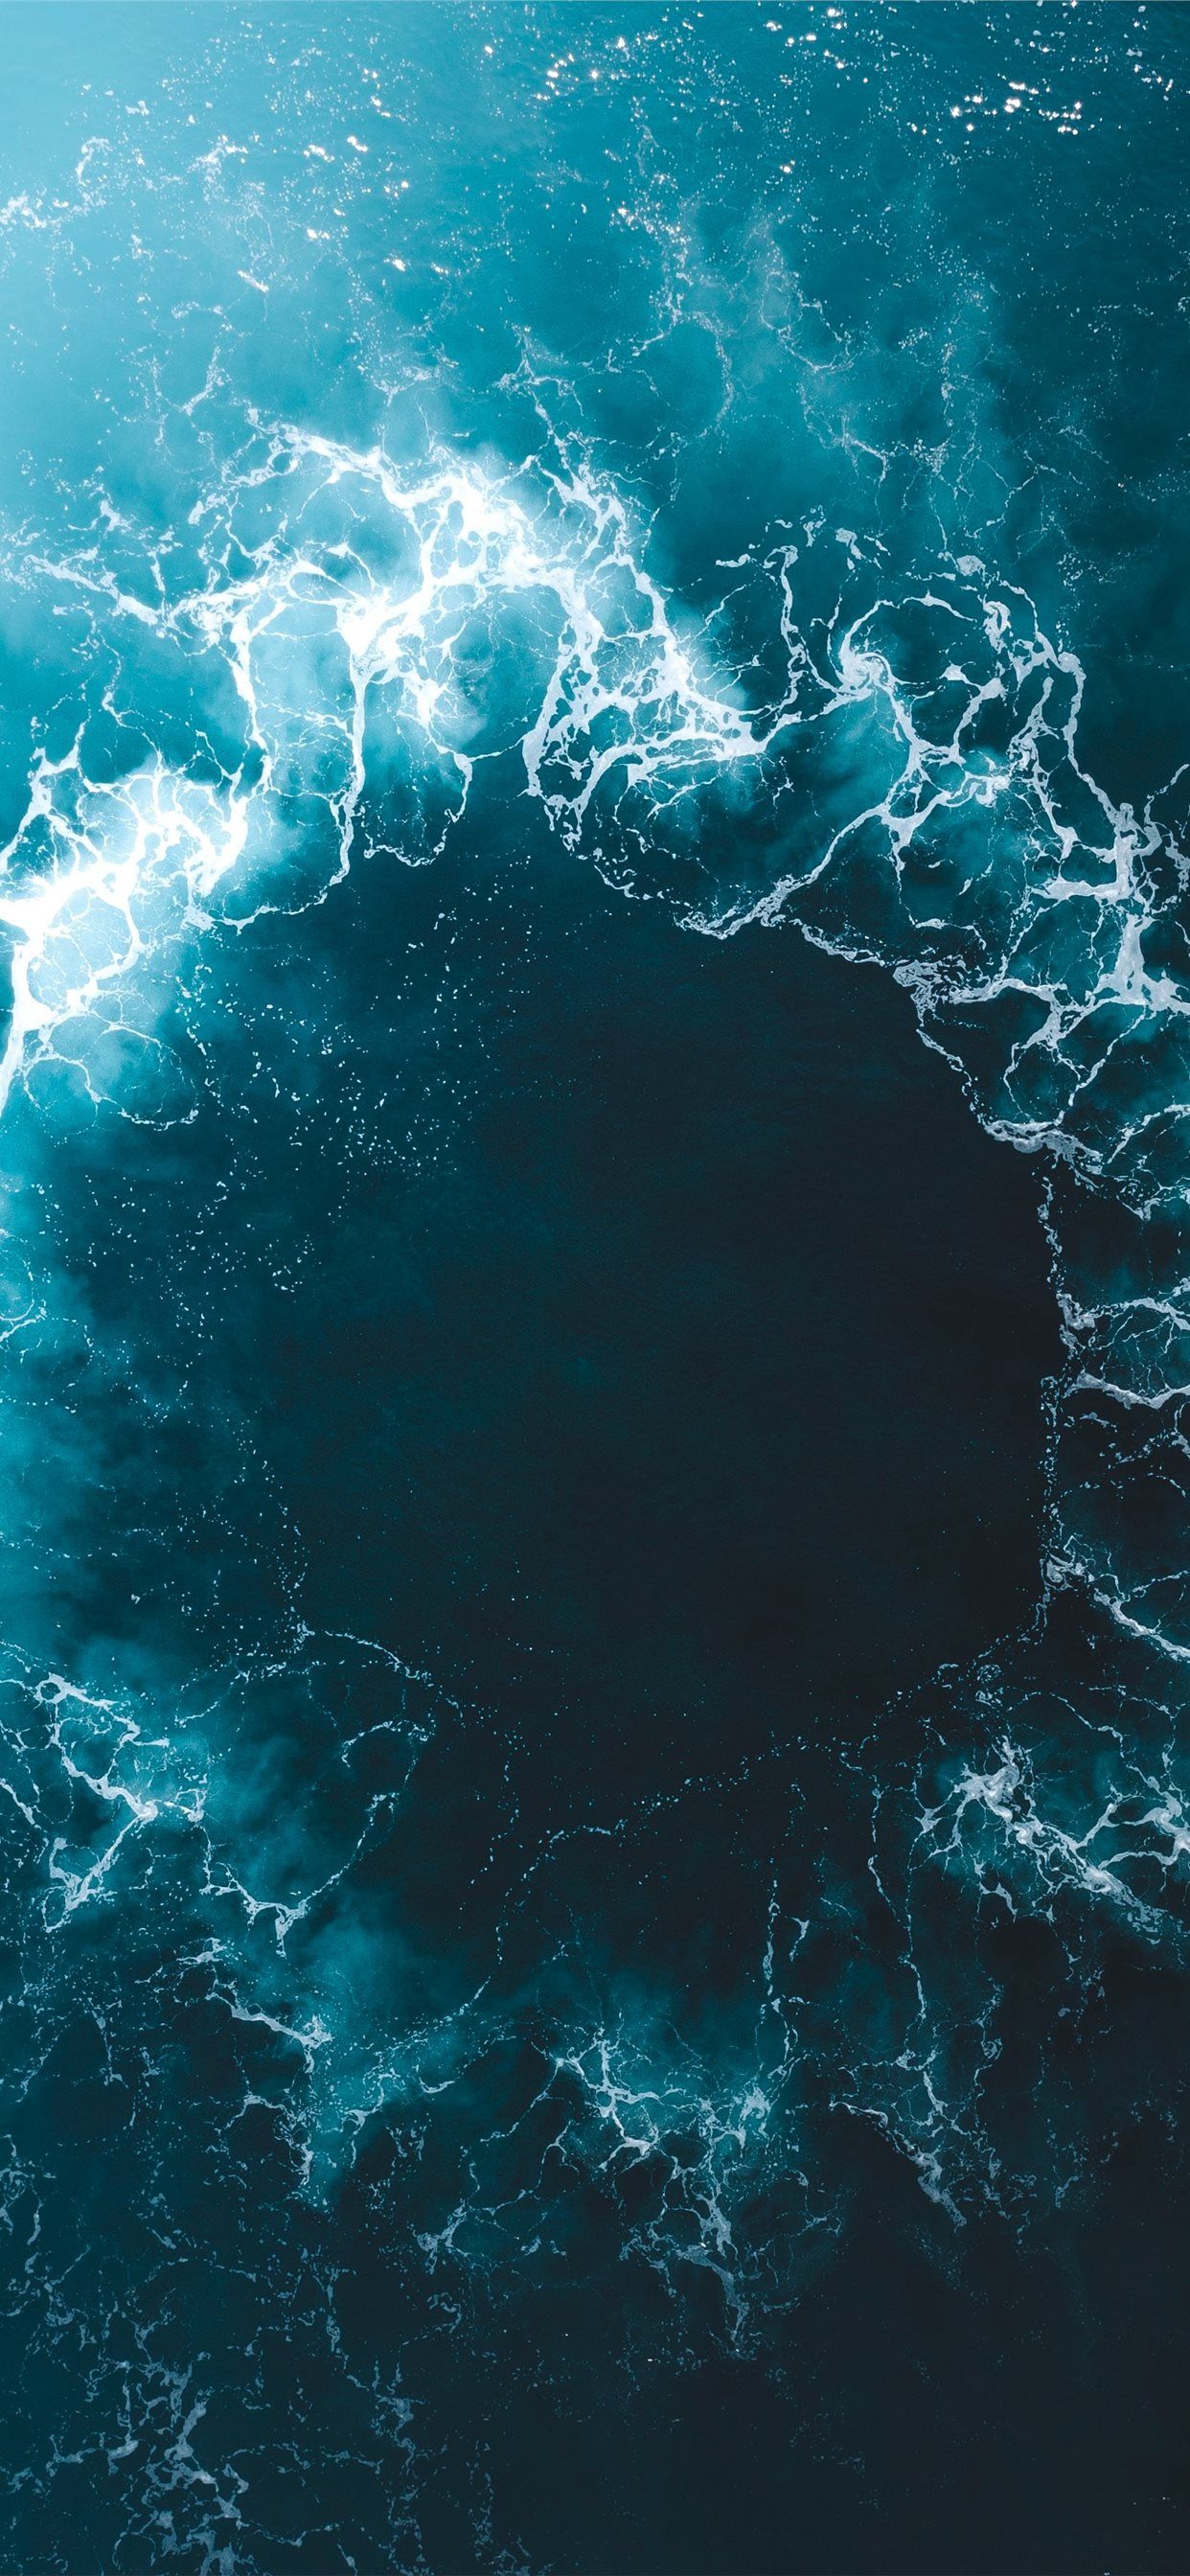 IPhone wallpaper with a photo of the sea from above - Water, teal